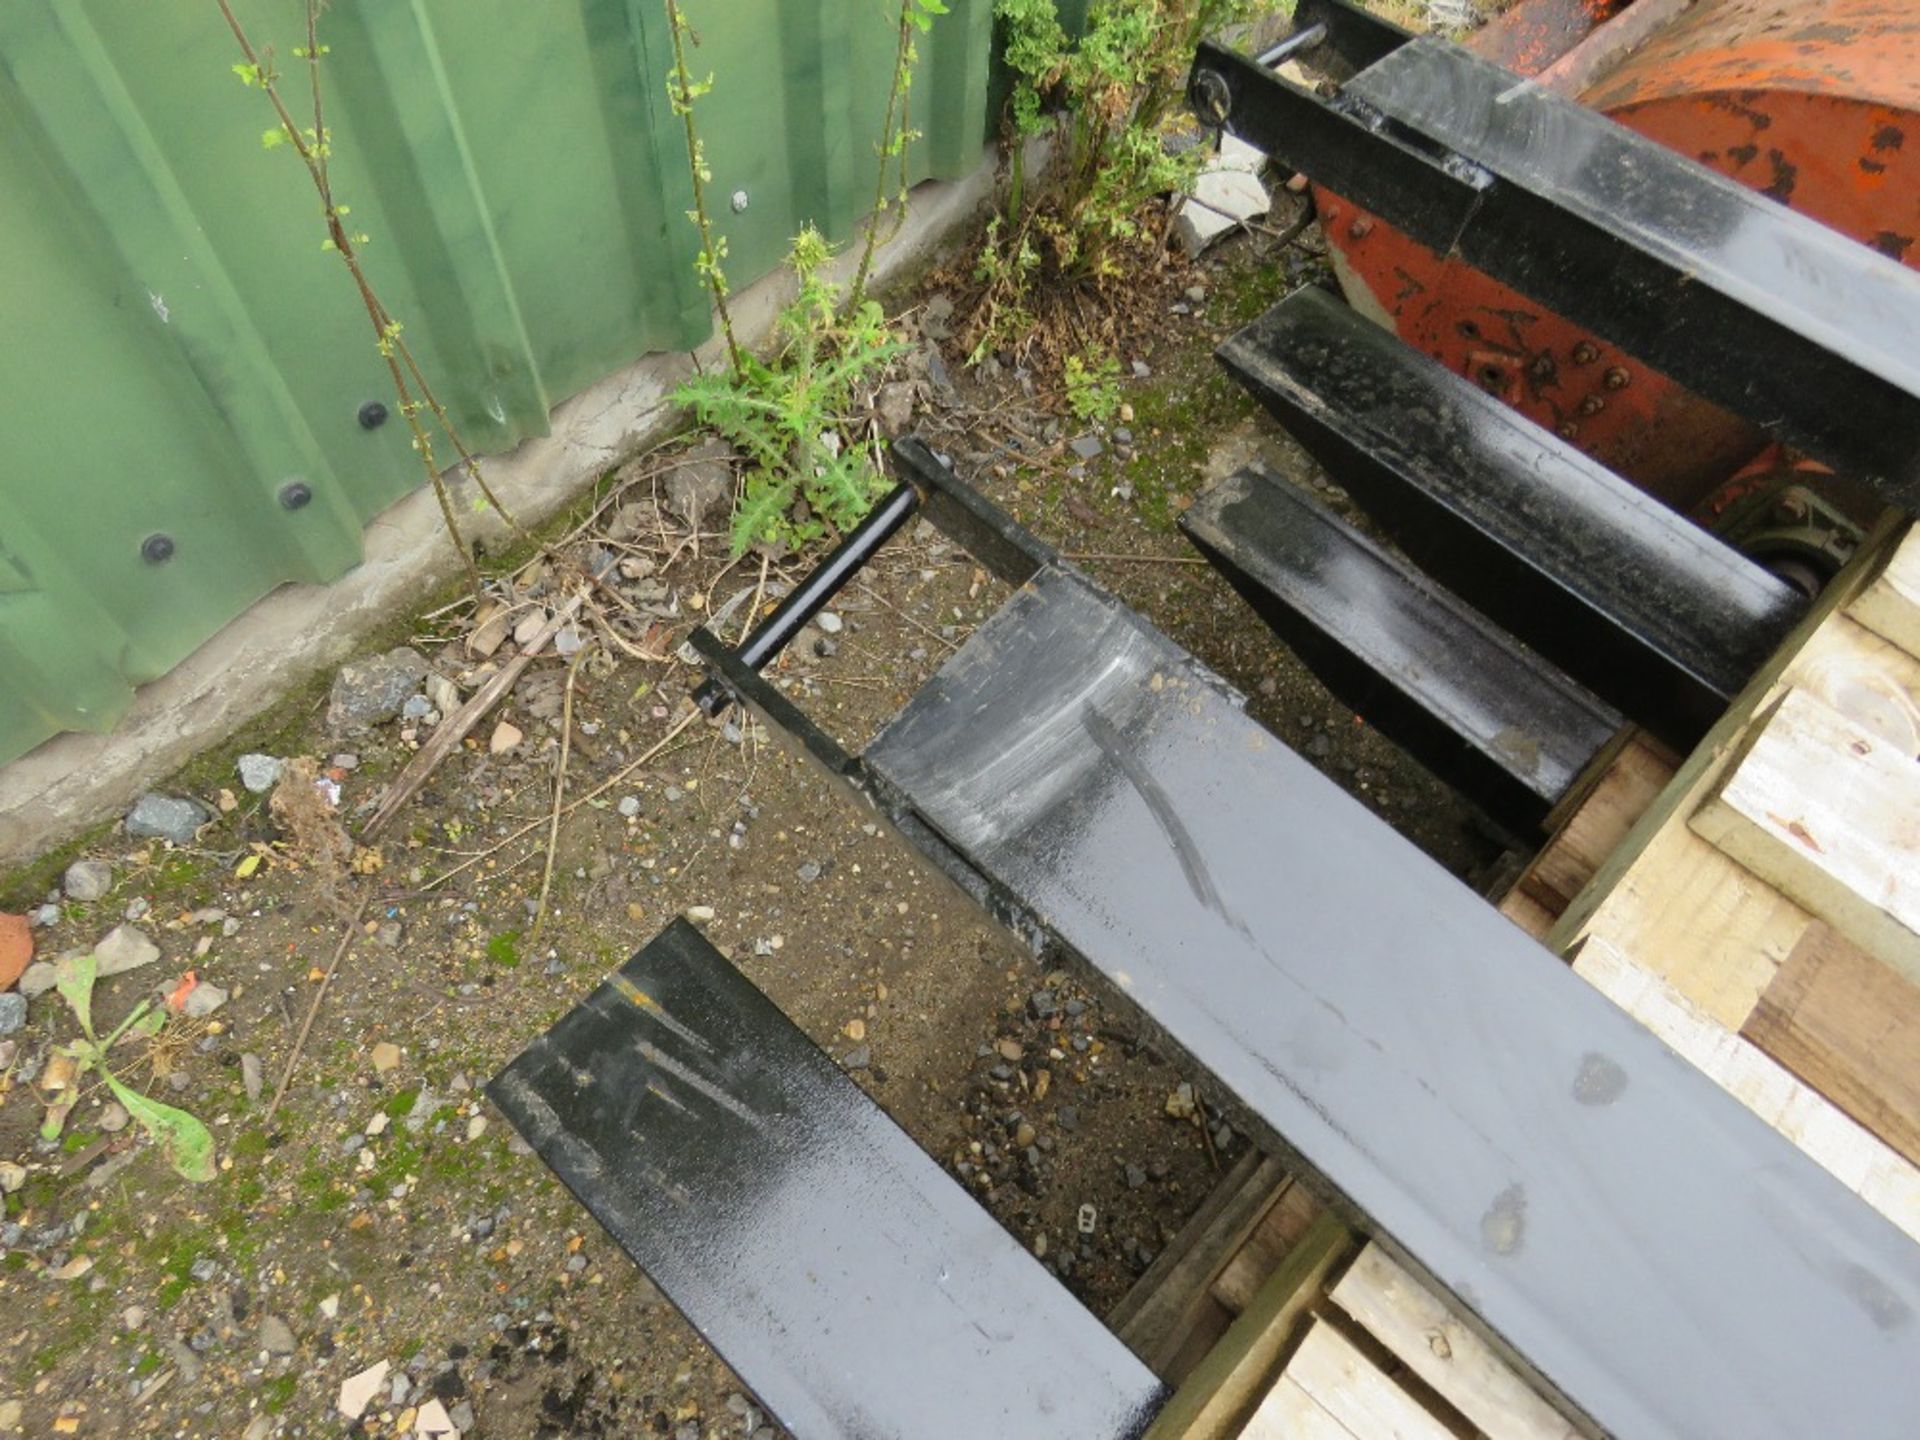 PAIR OF 6FT LENGTH FORKLIFT EXTENSION FORK TINES / SLEEVES. 5" WIDTH, WITH LOCKING PINS. - Image 2 of 2